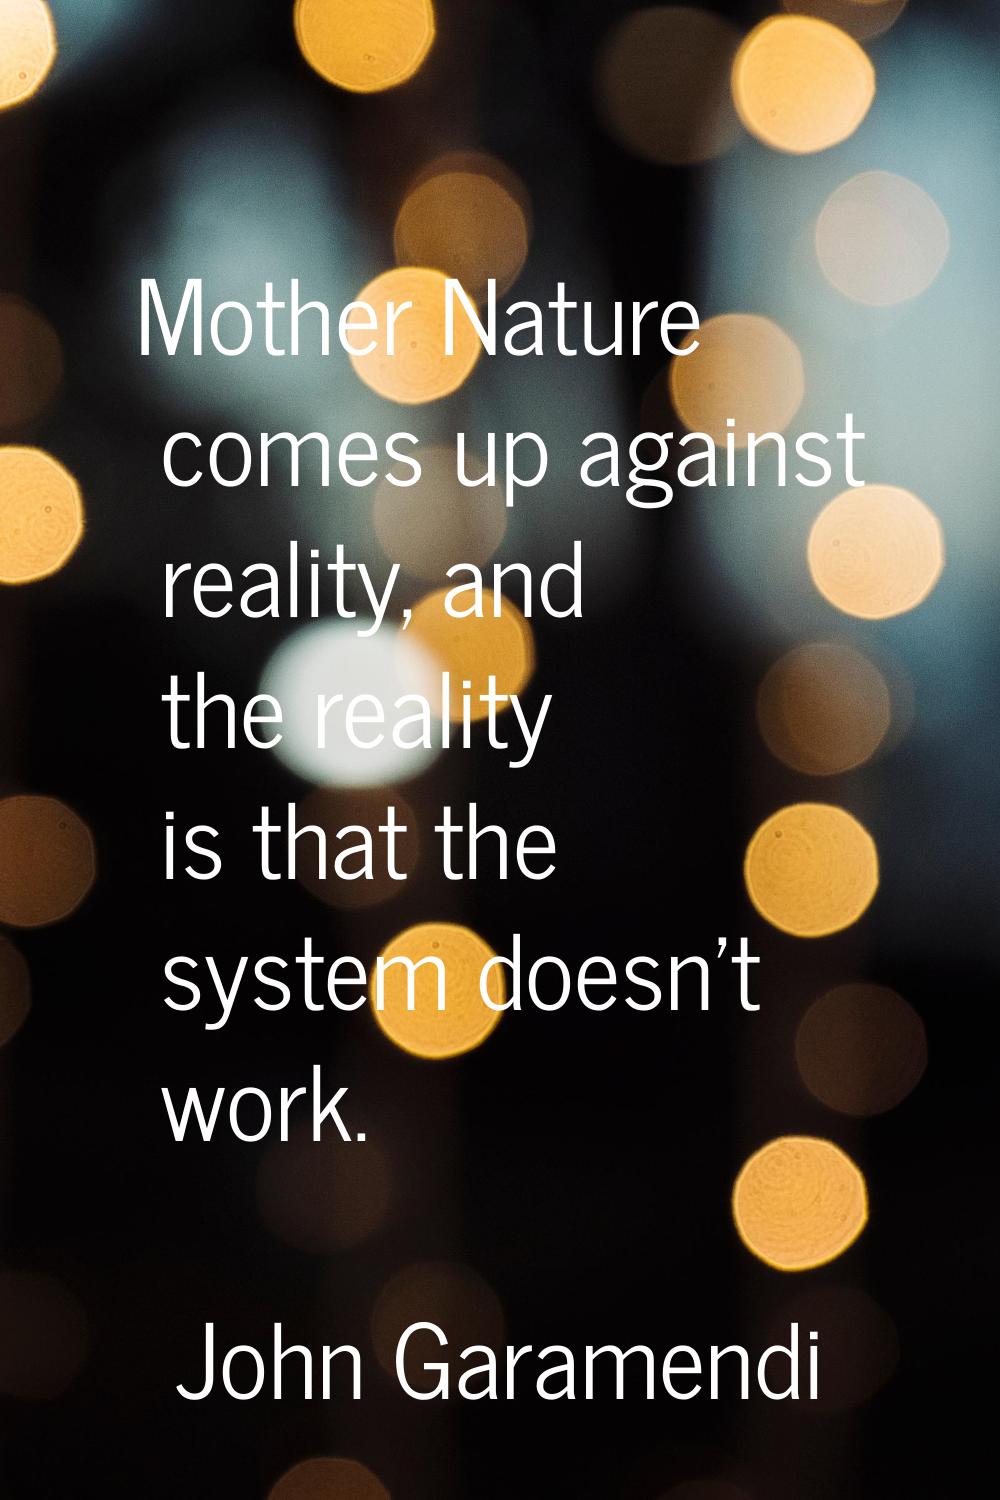 Mother Nature comes up against reality, and the reality is that the system doesn't work.